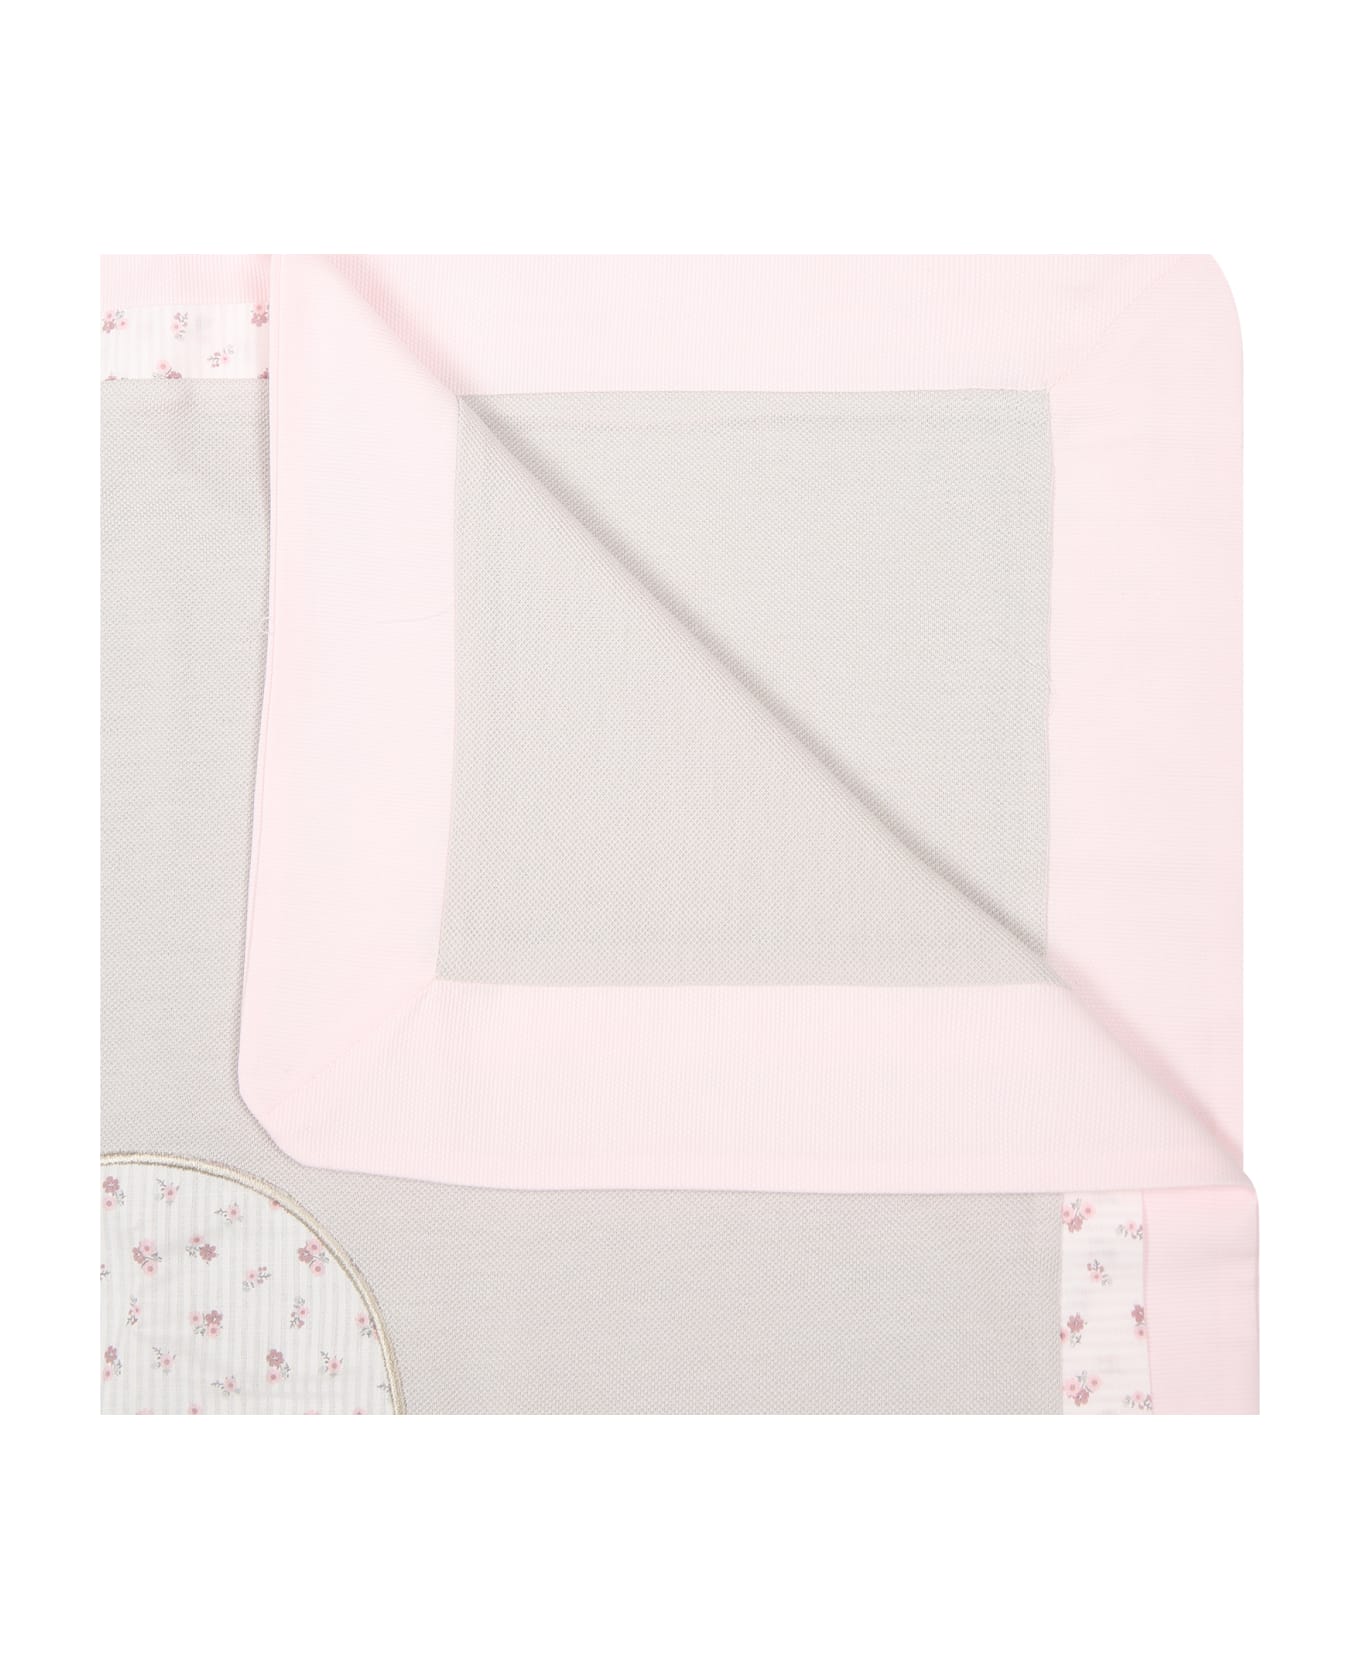 La stupenderia Beige Blanket For Baby Girl With Hearts And Writing - Beige